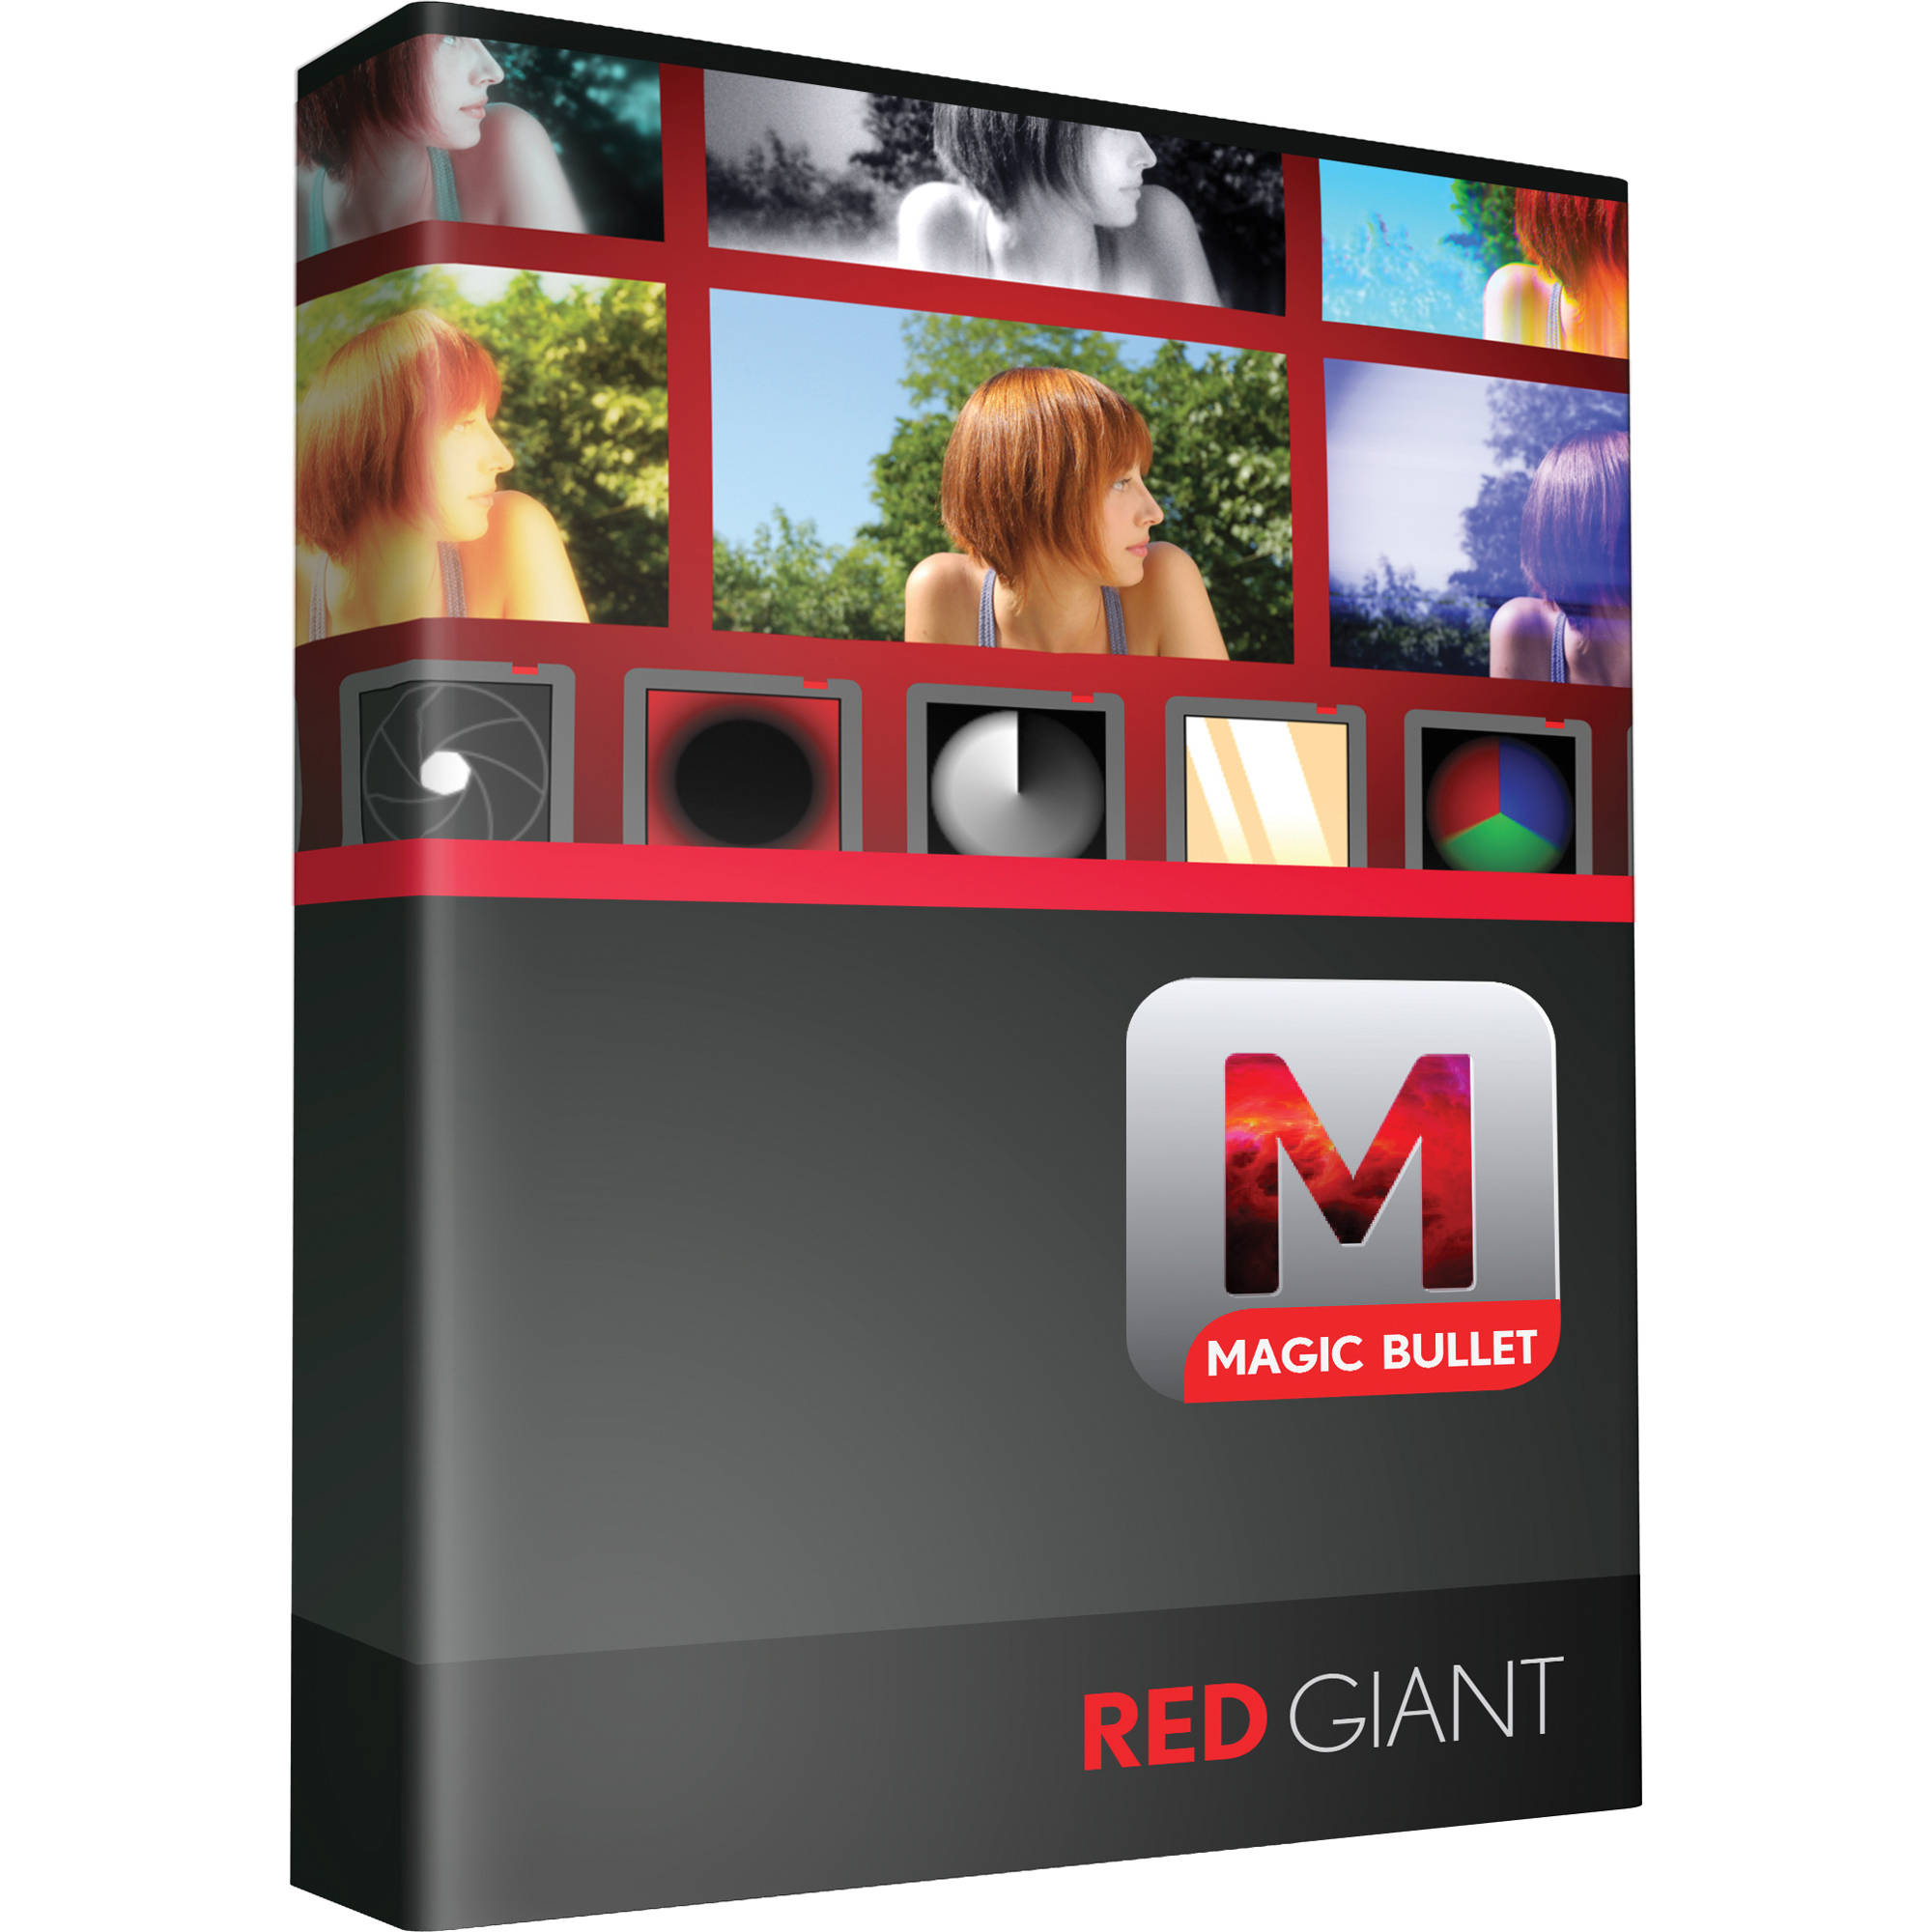 Magic suite. Red giant Magic Bullet. Red giant Magic Bullet looks. Red giant Magic Bullet Suite. Magic Bullet looks logo.